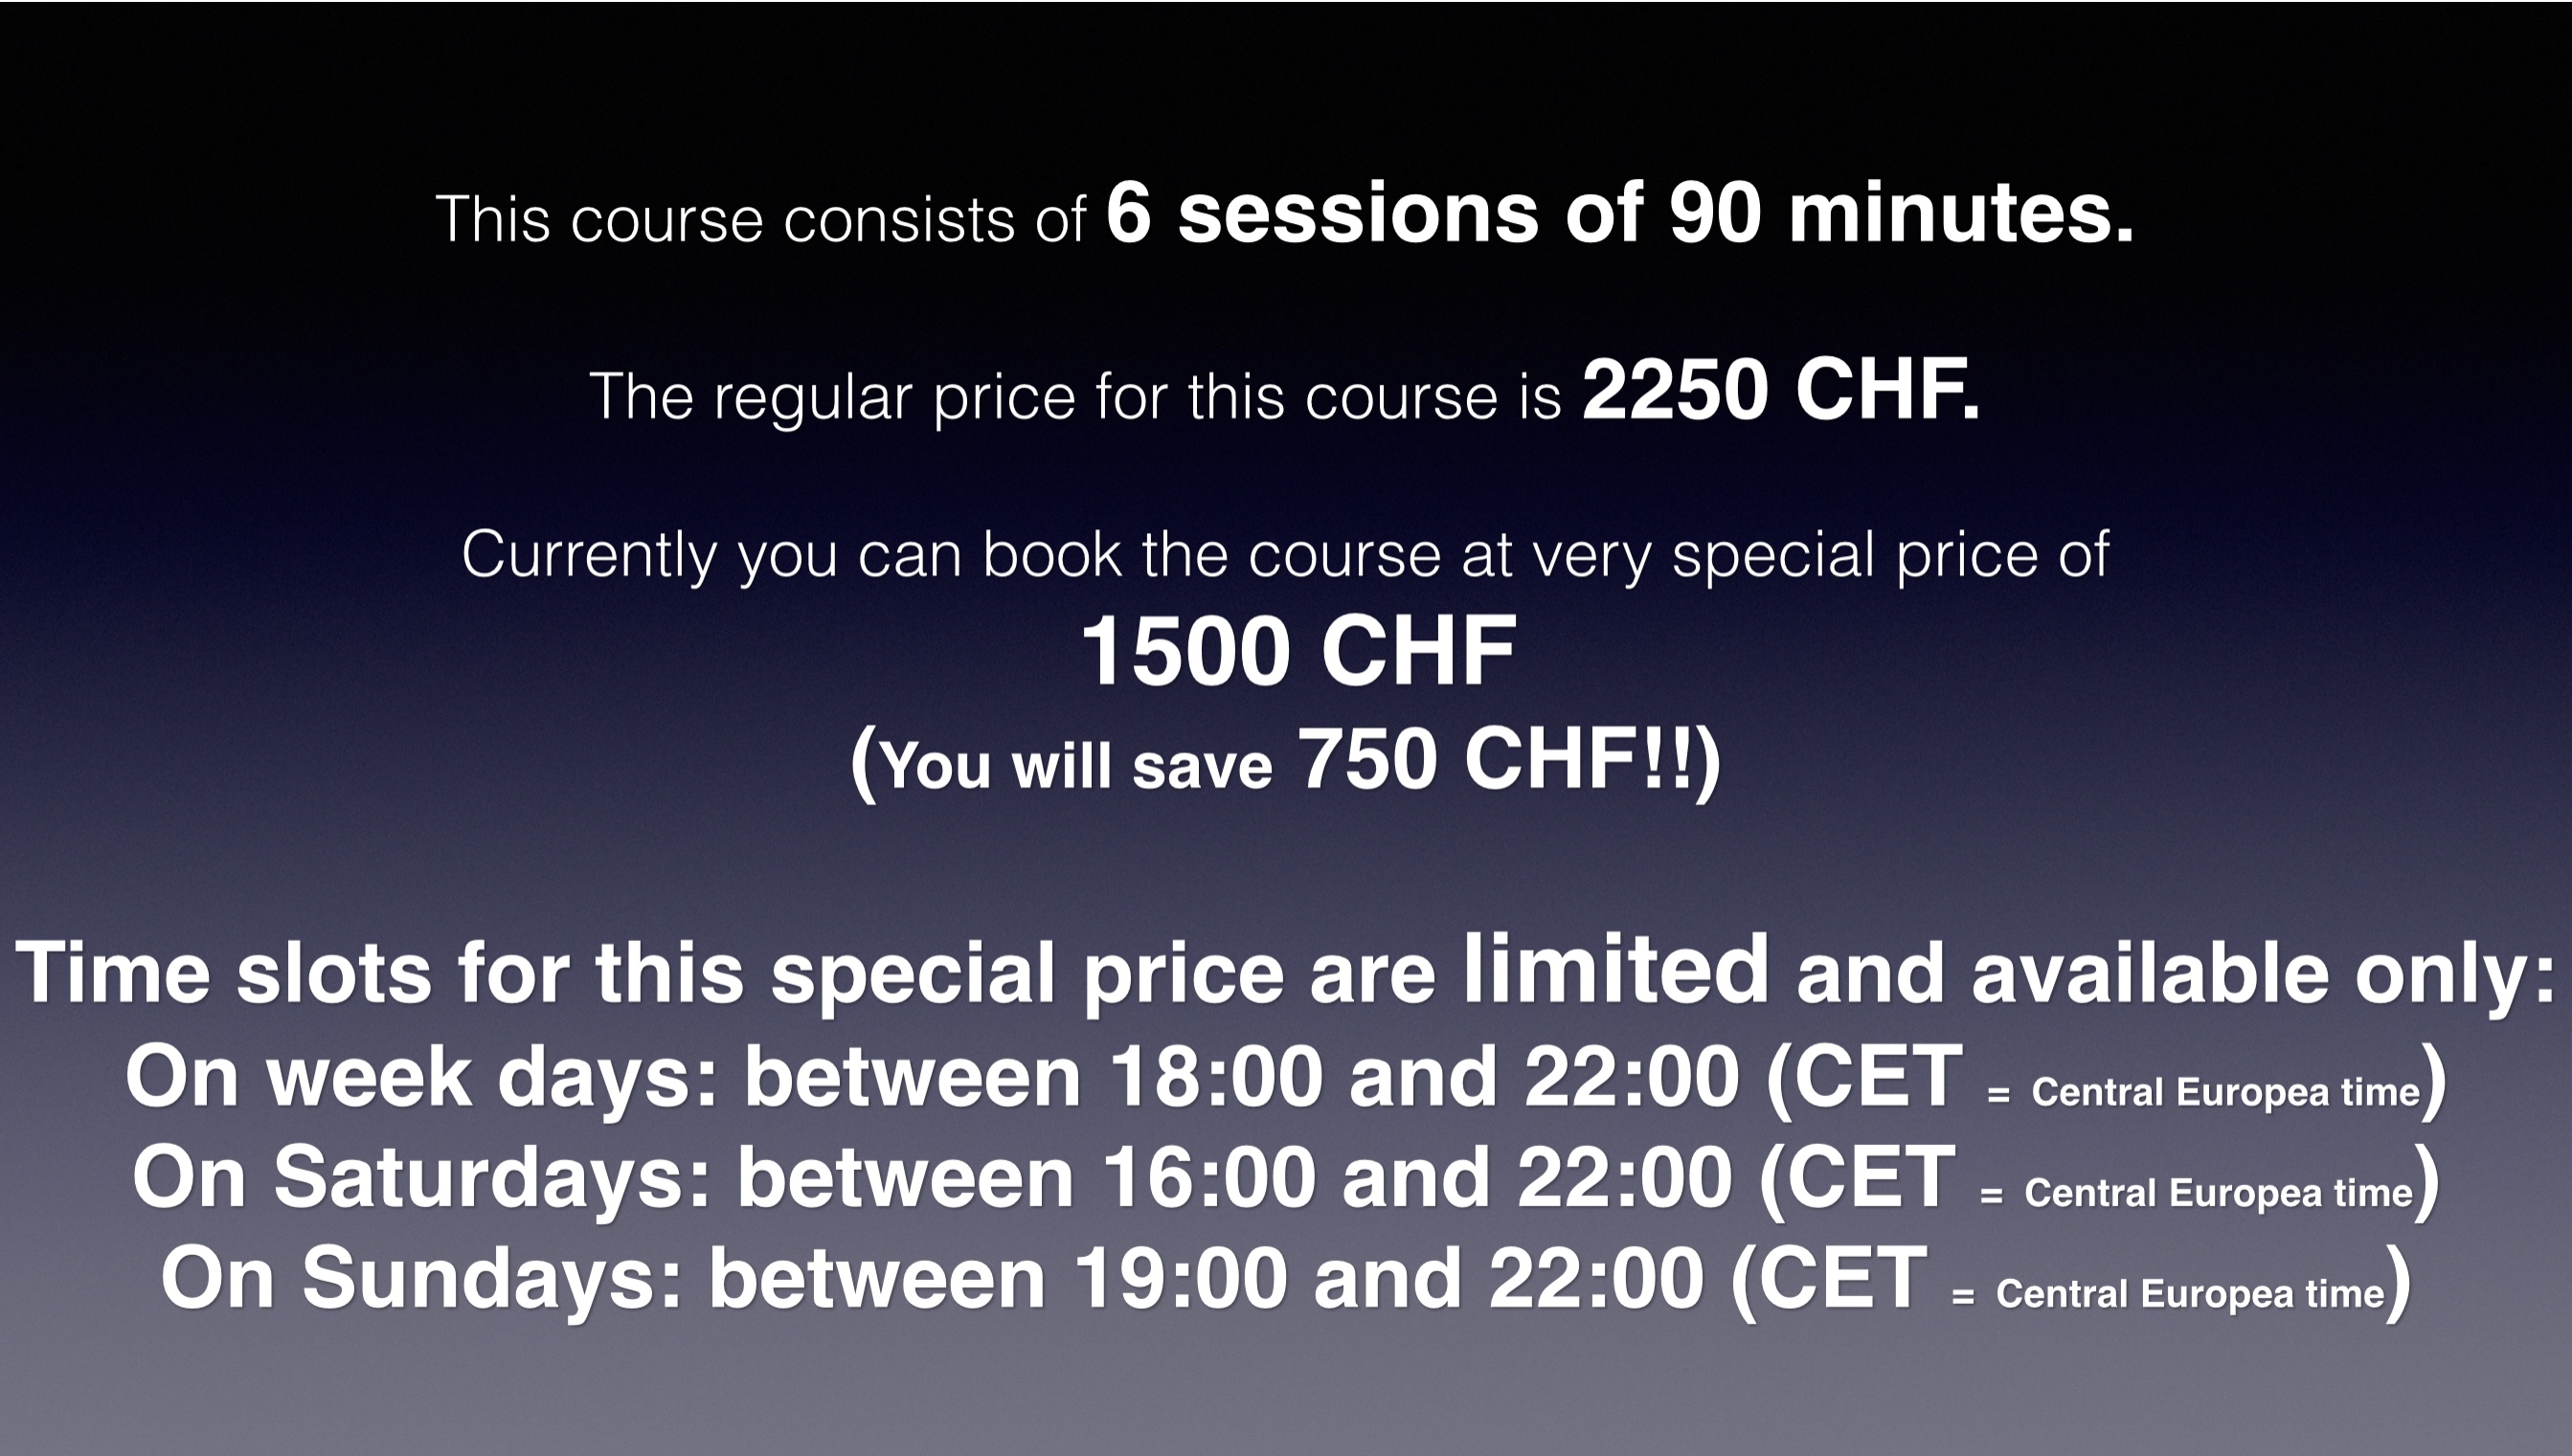 Special price for limited time slots